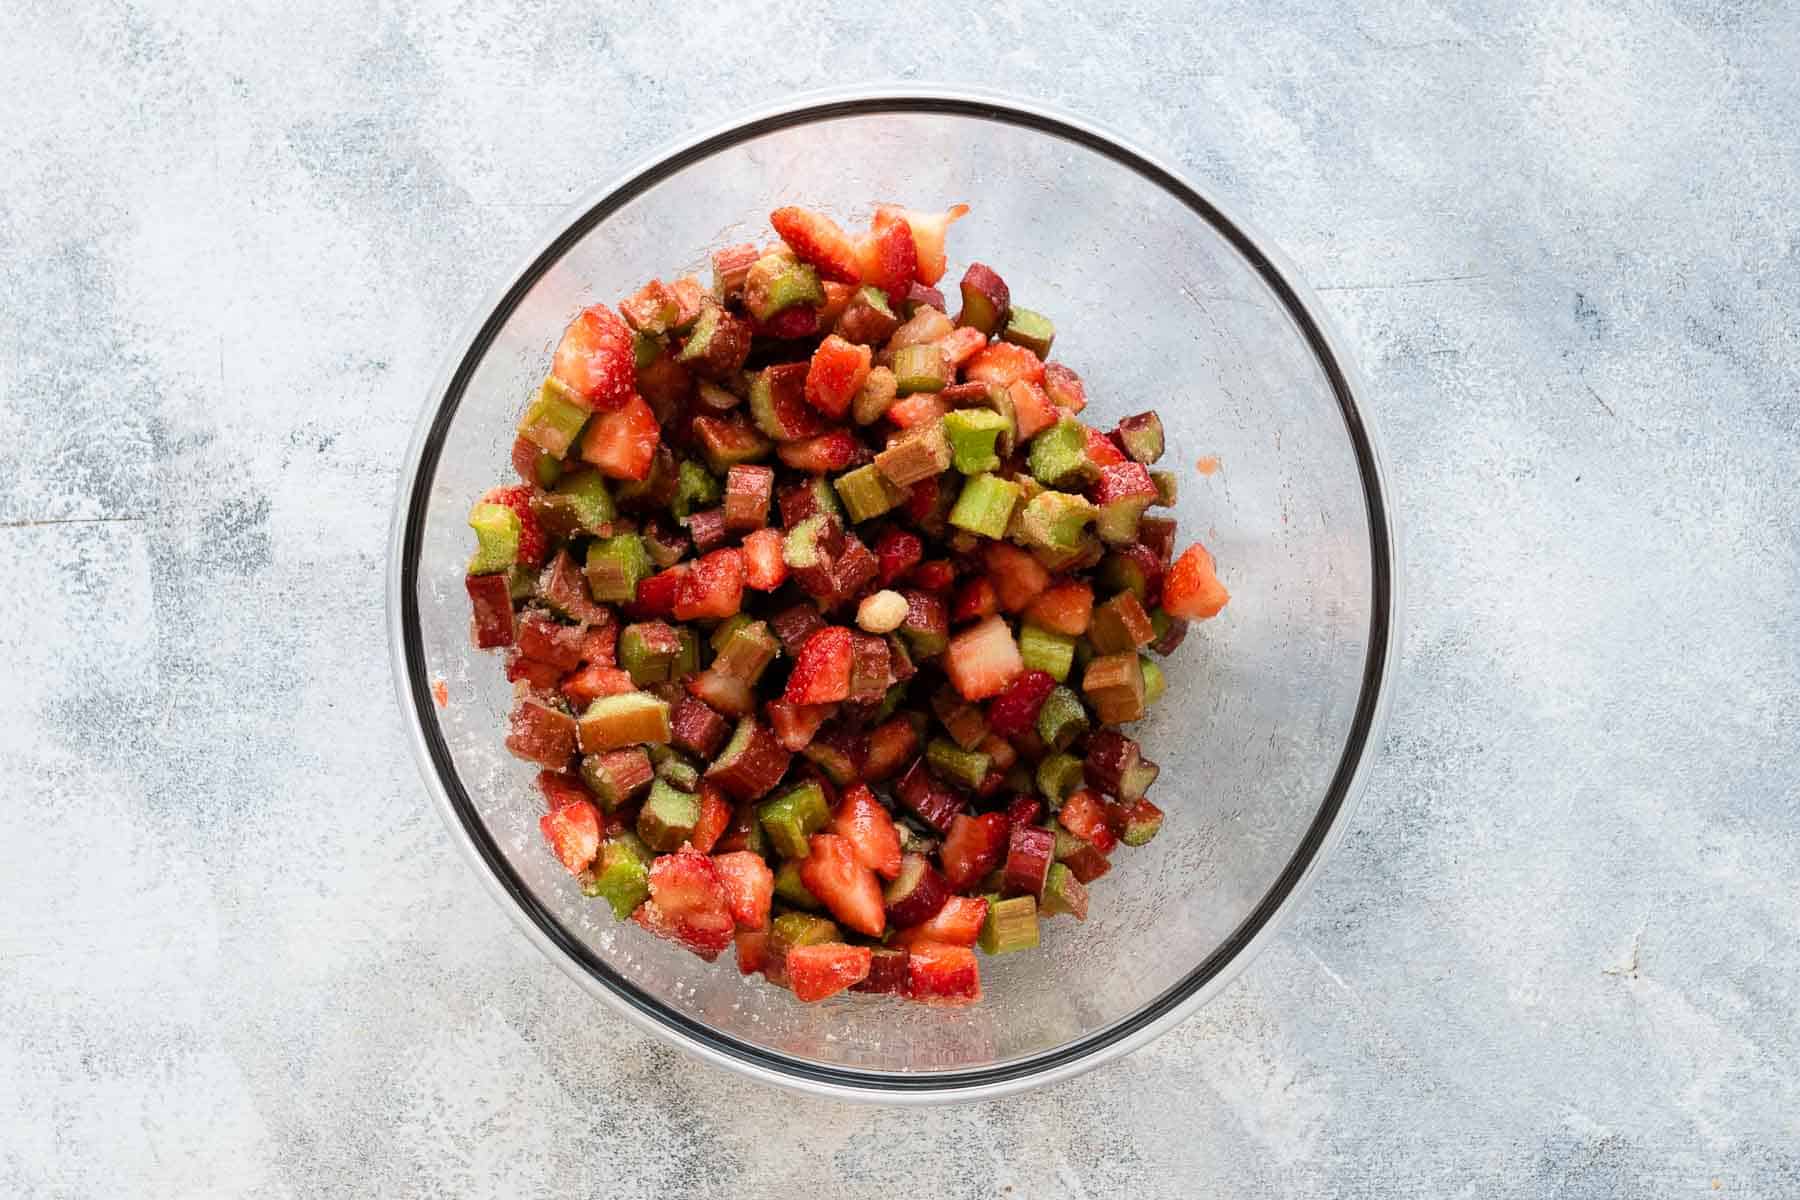 chopped rhubarb and strawberries with sugar in a bowl